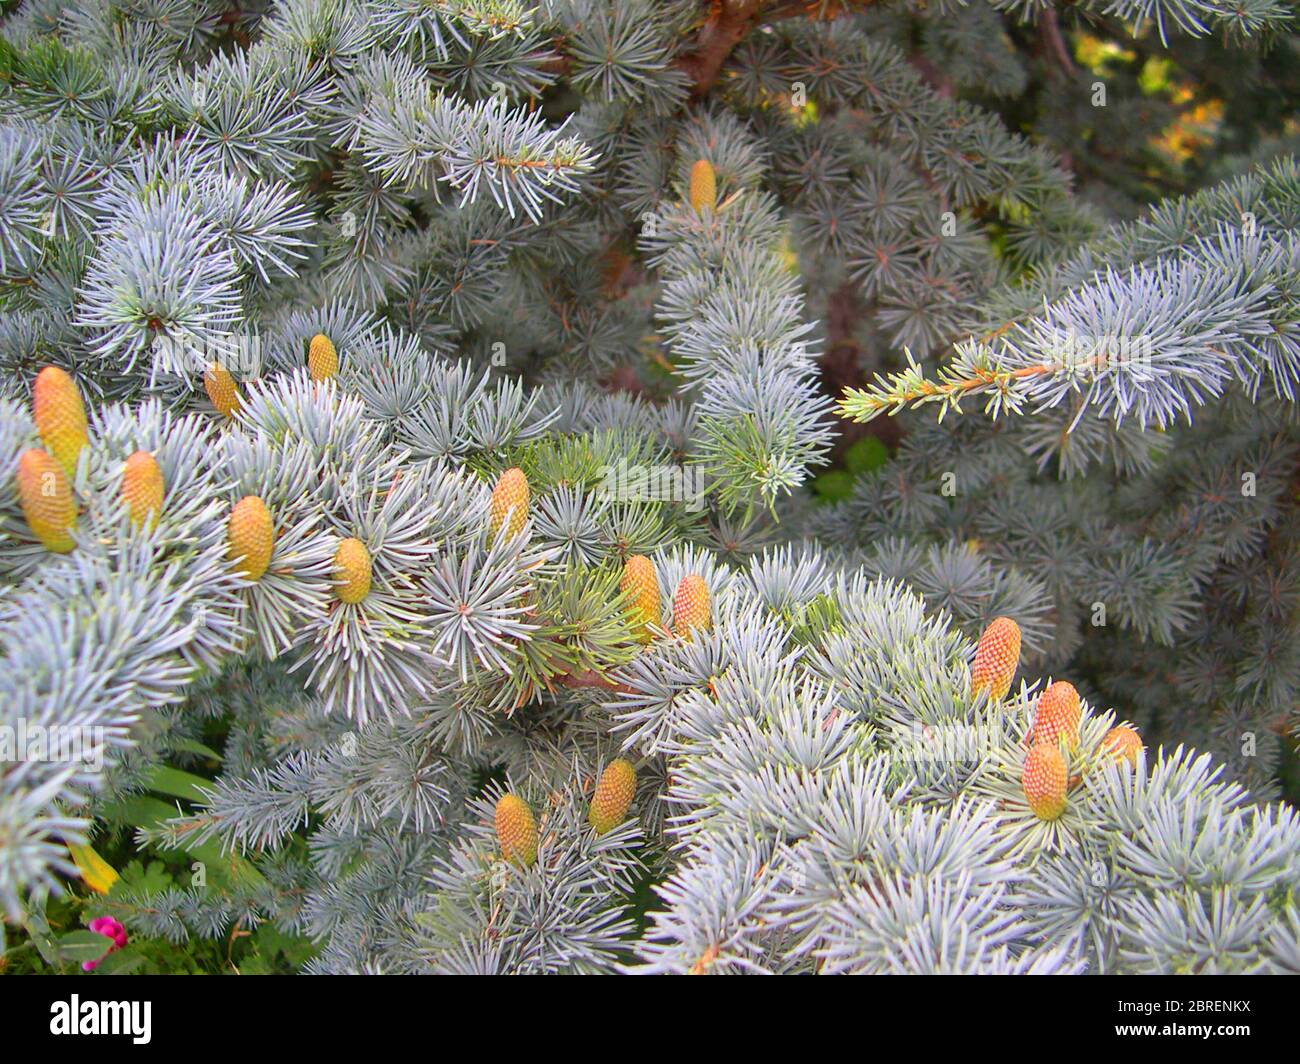 Branches of blue spruce. Stock Photo